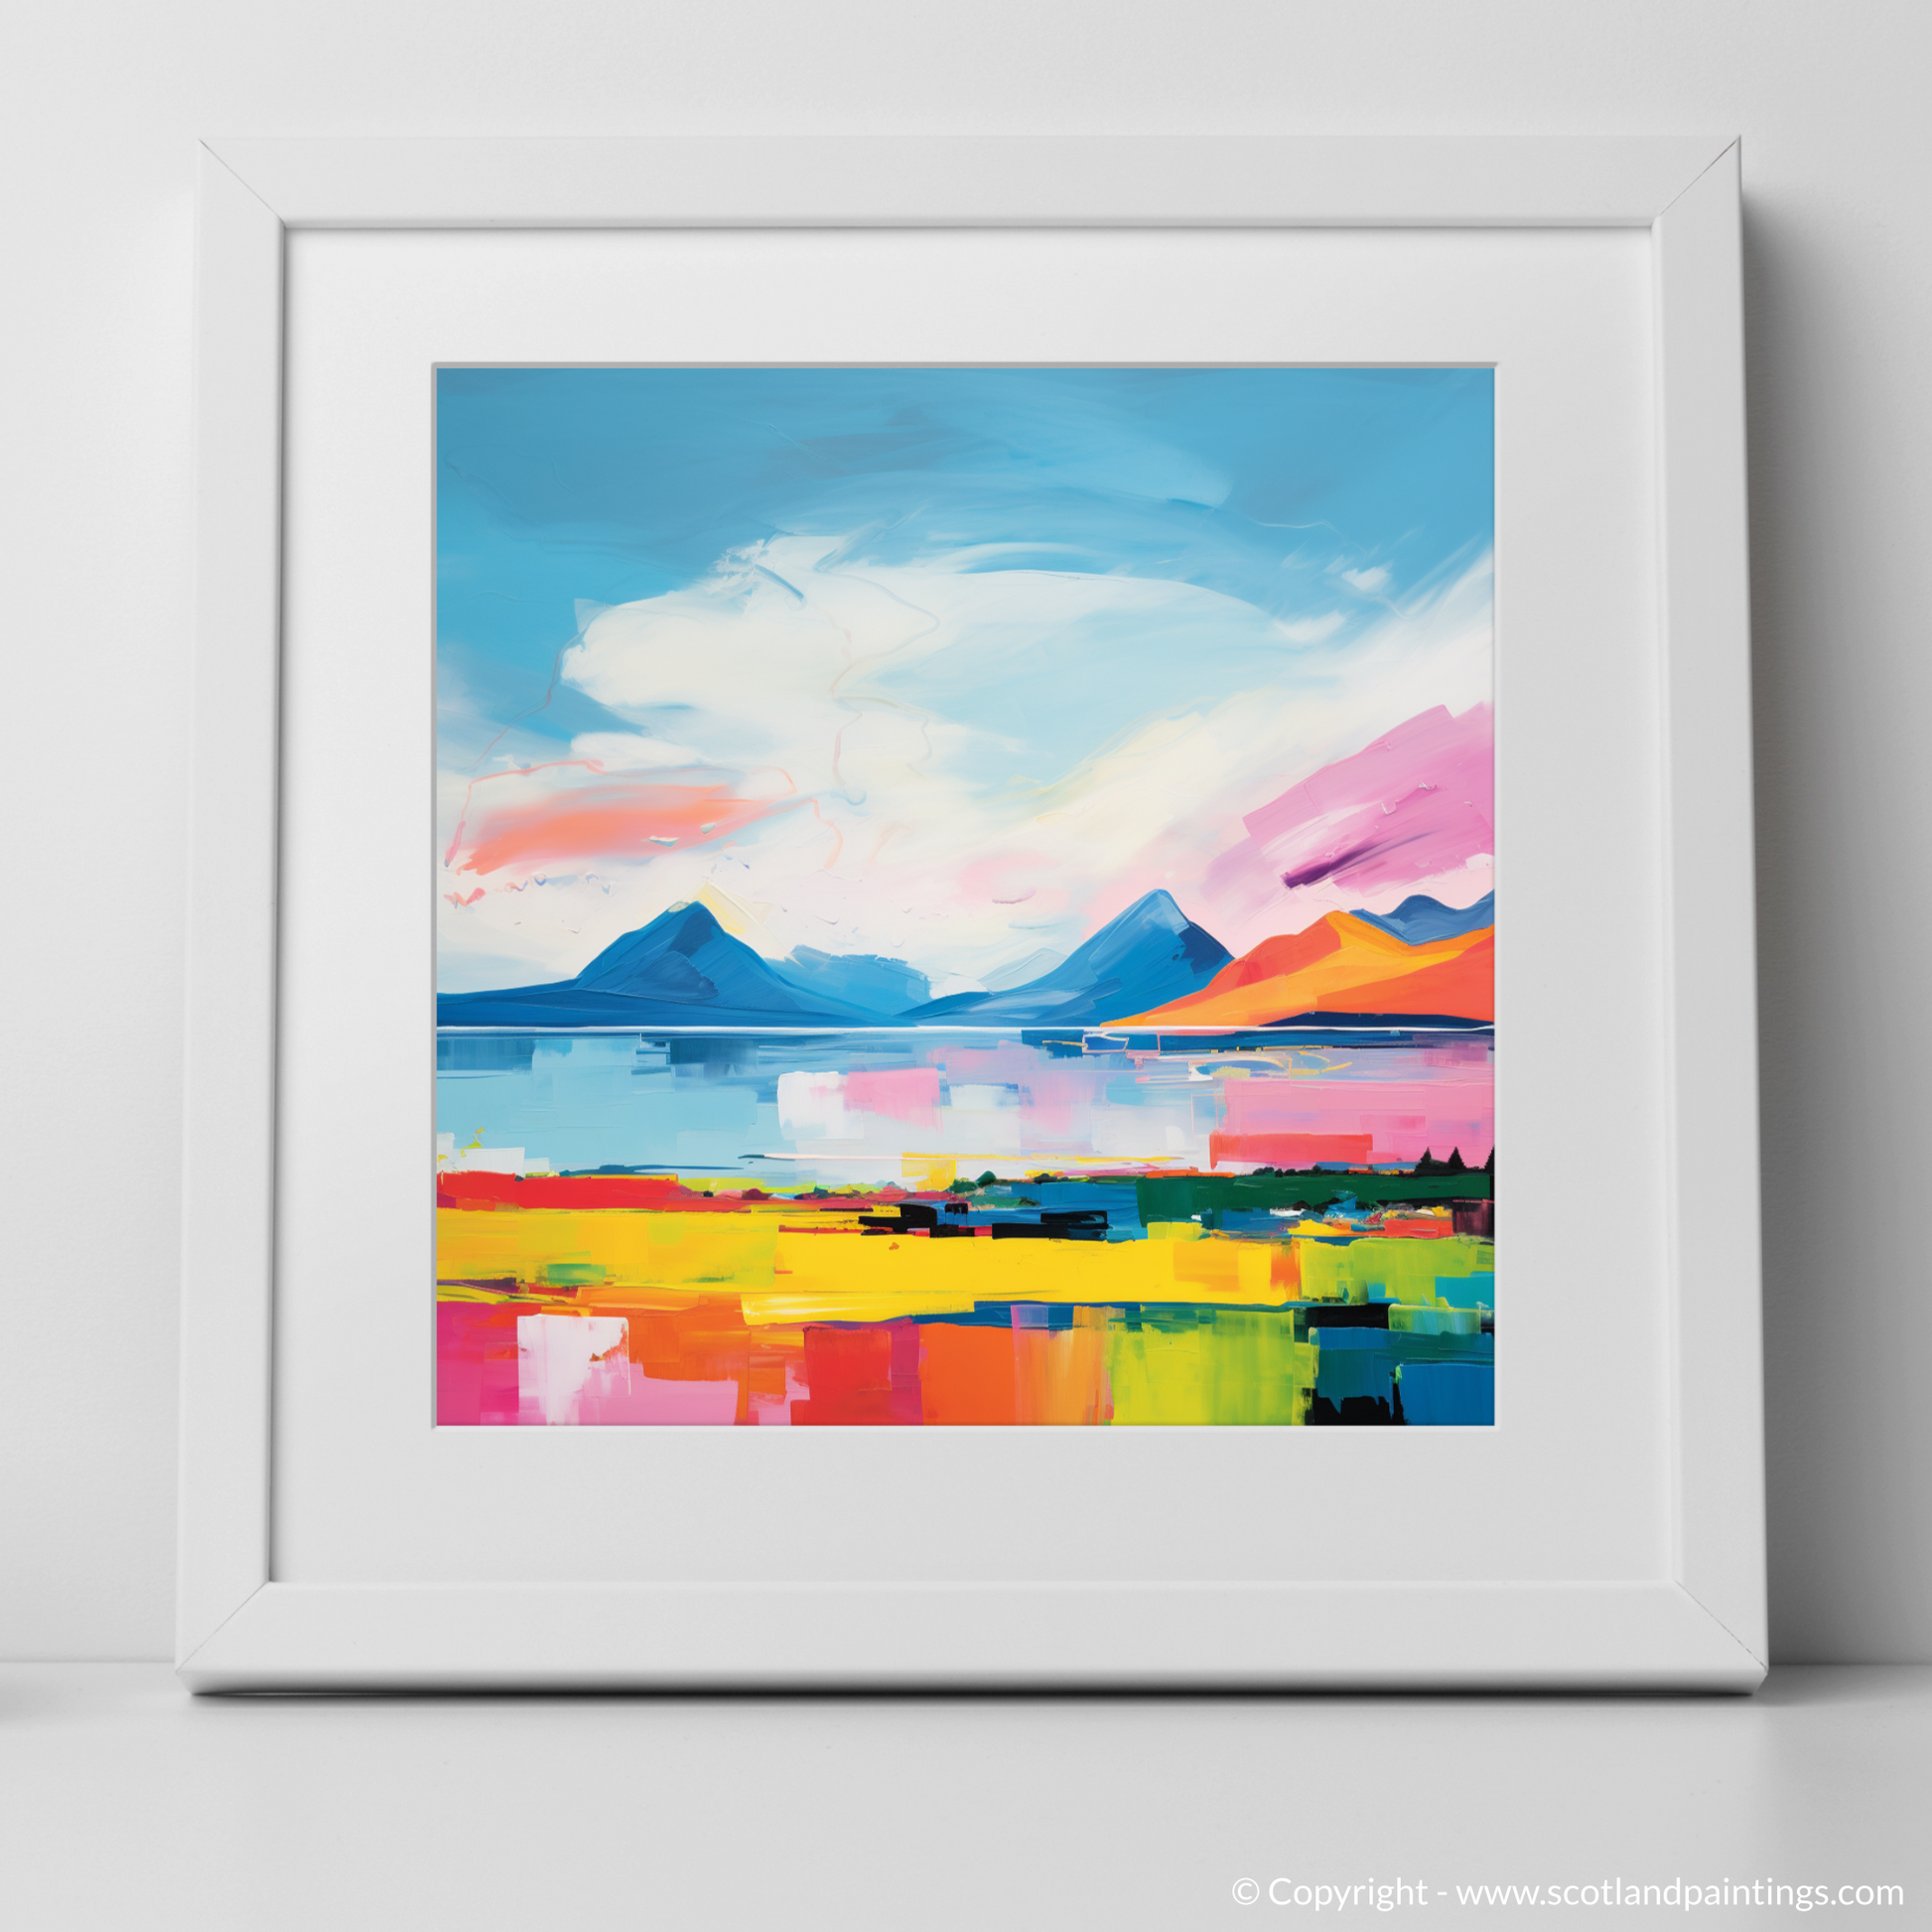 Art Print of Isle of Arran, Firth of Clyde in summer with a white frame